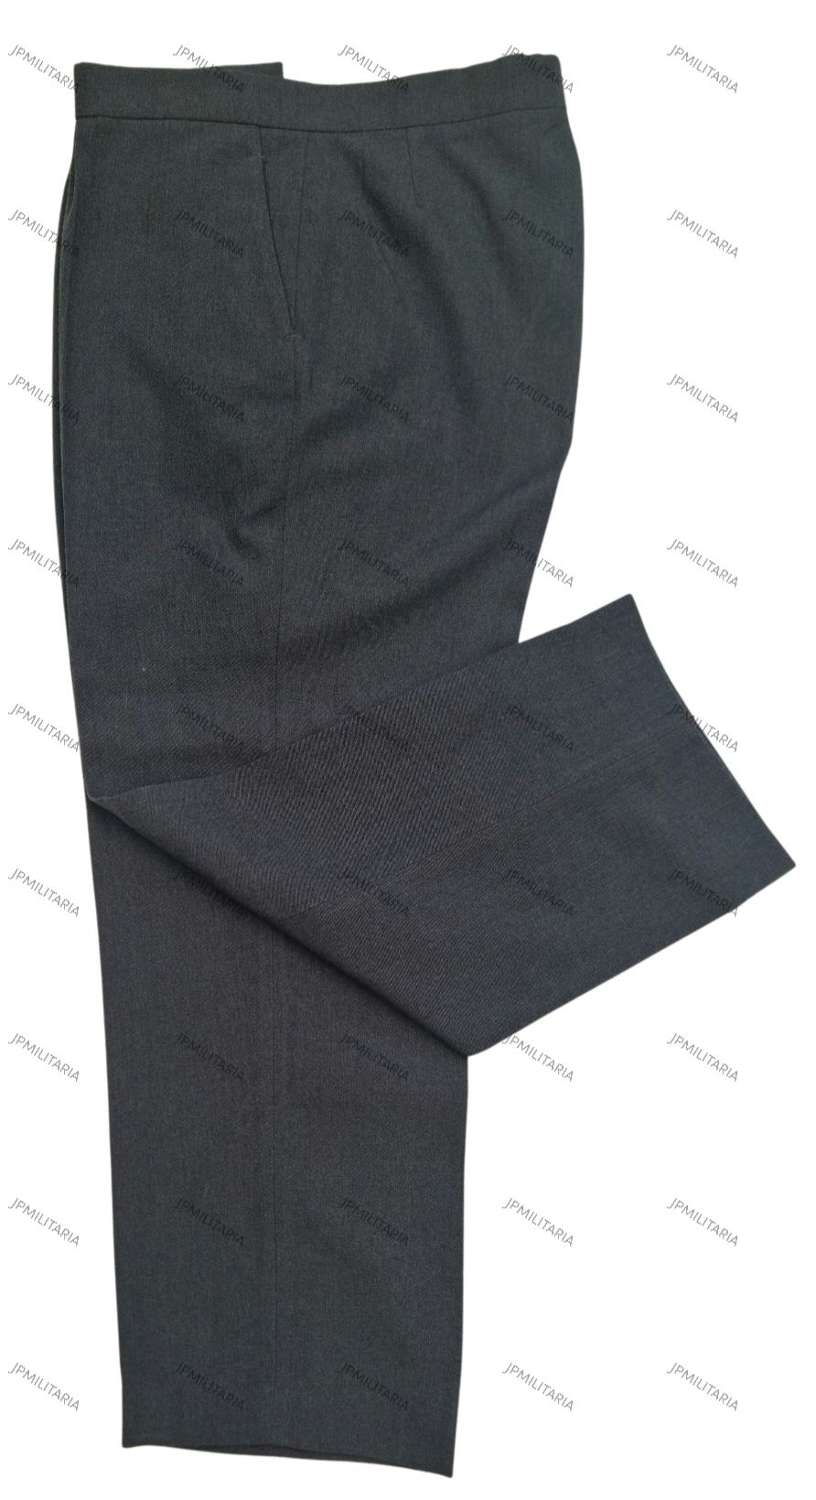 RAF Other ranks dress trousers